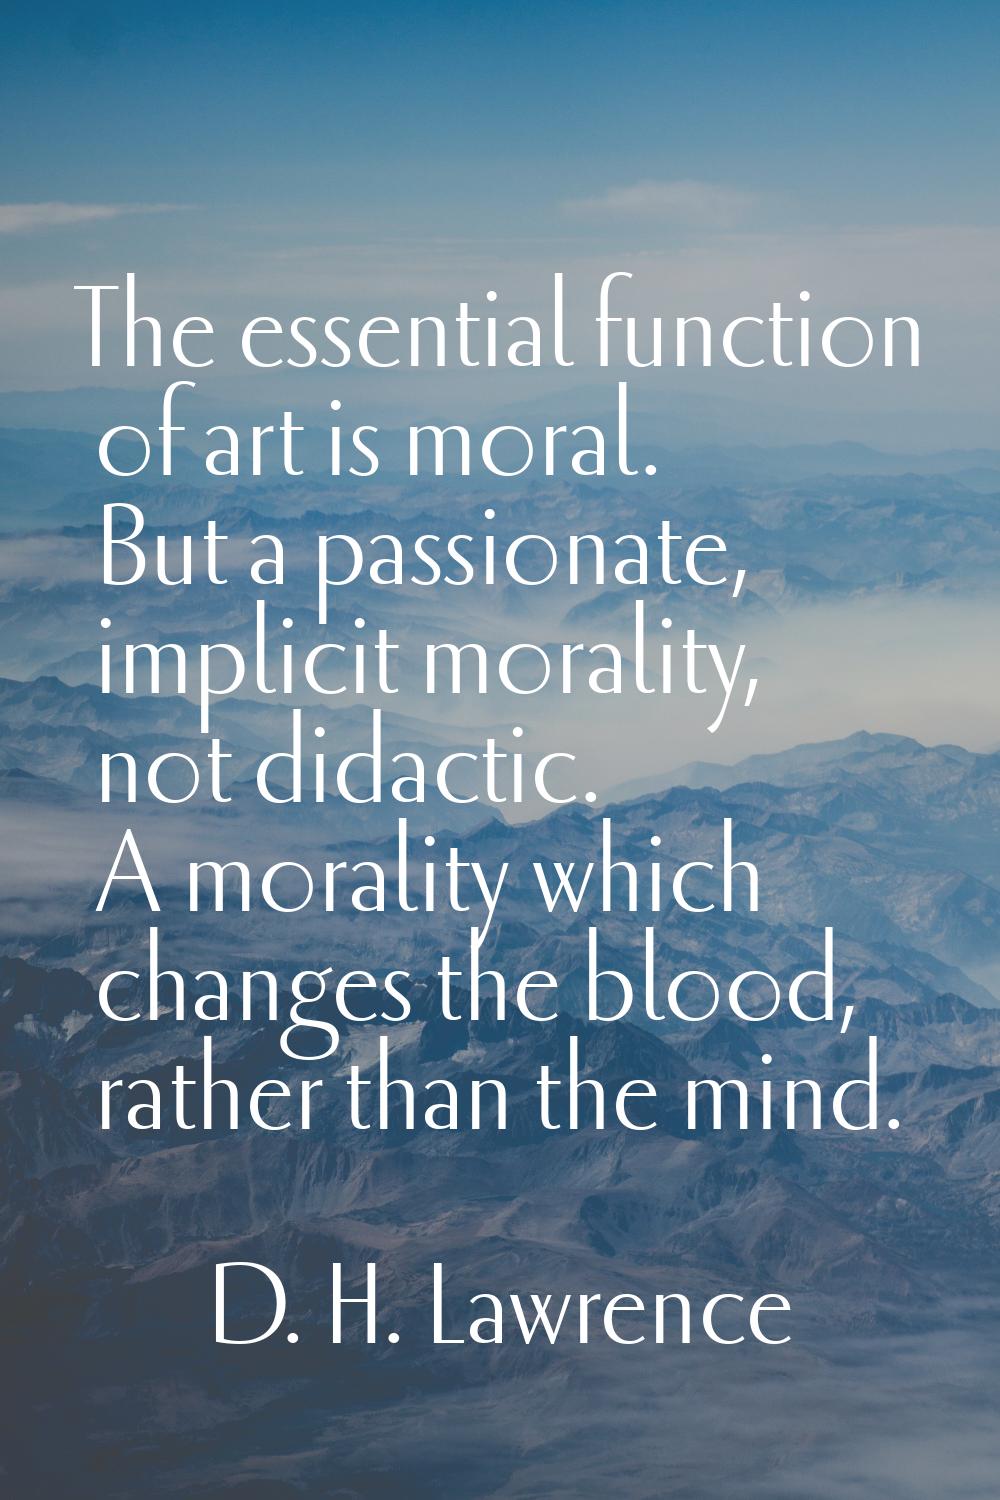 The essential function of art is moral. But a passionate, implicit morality, not didactic. A morali